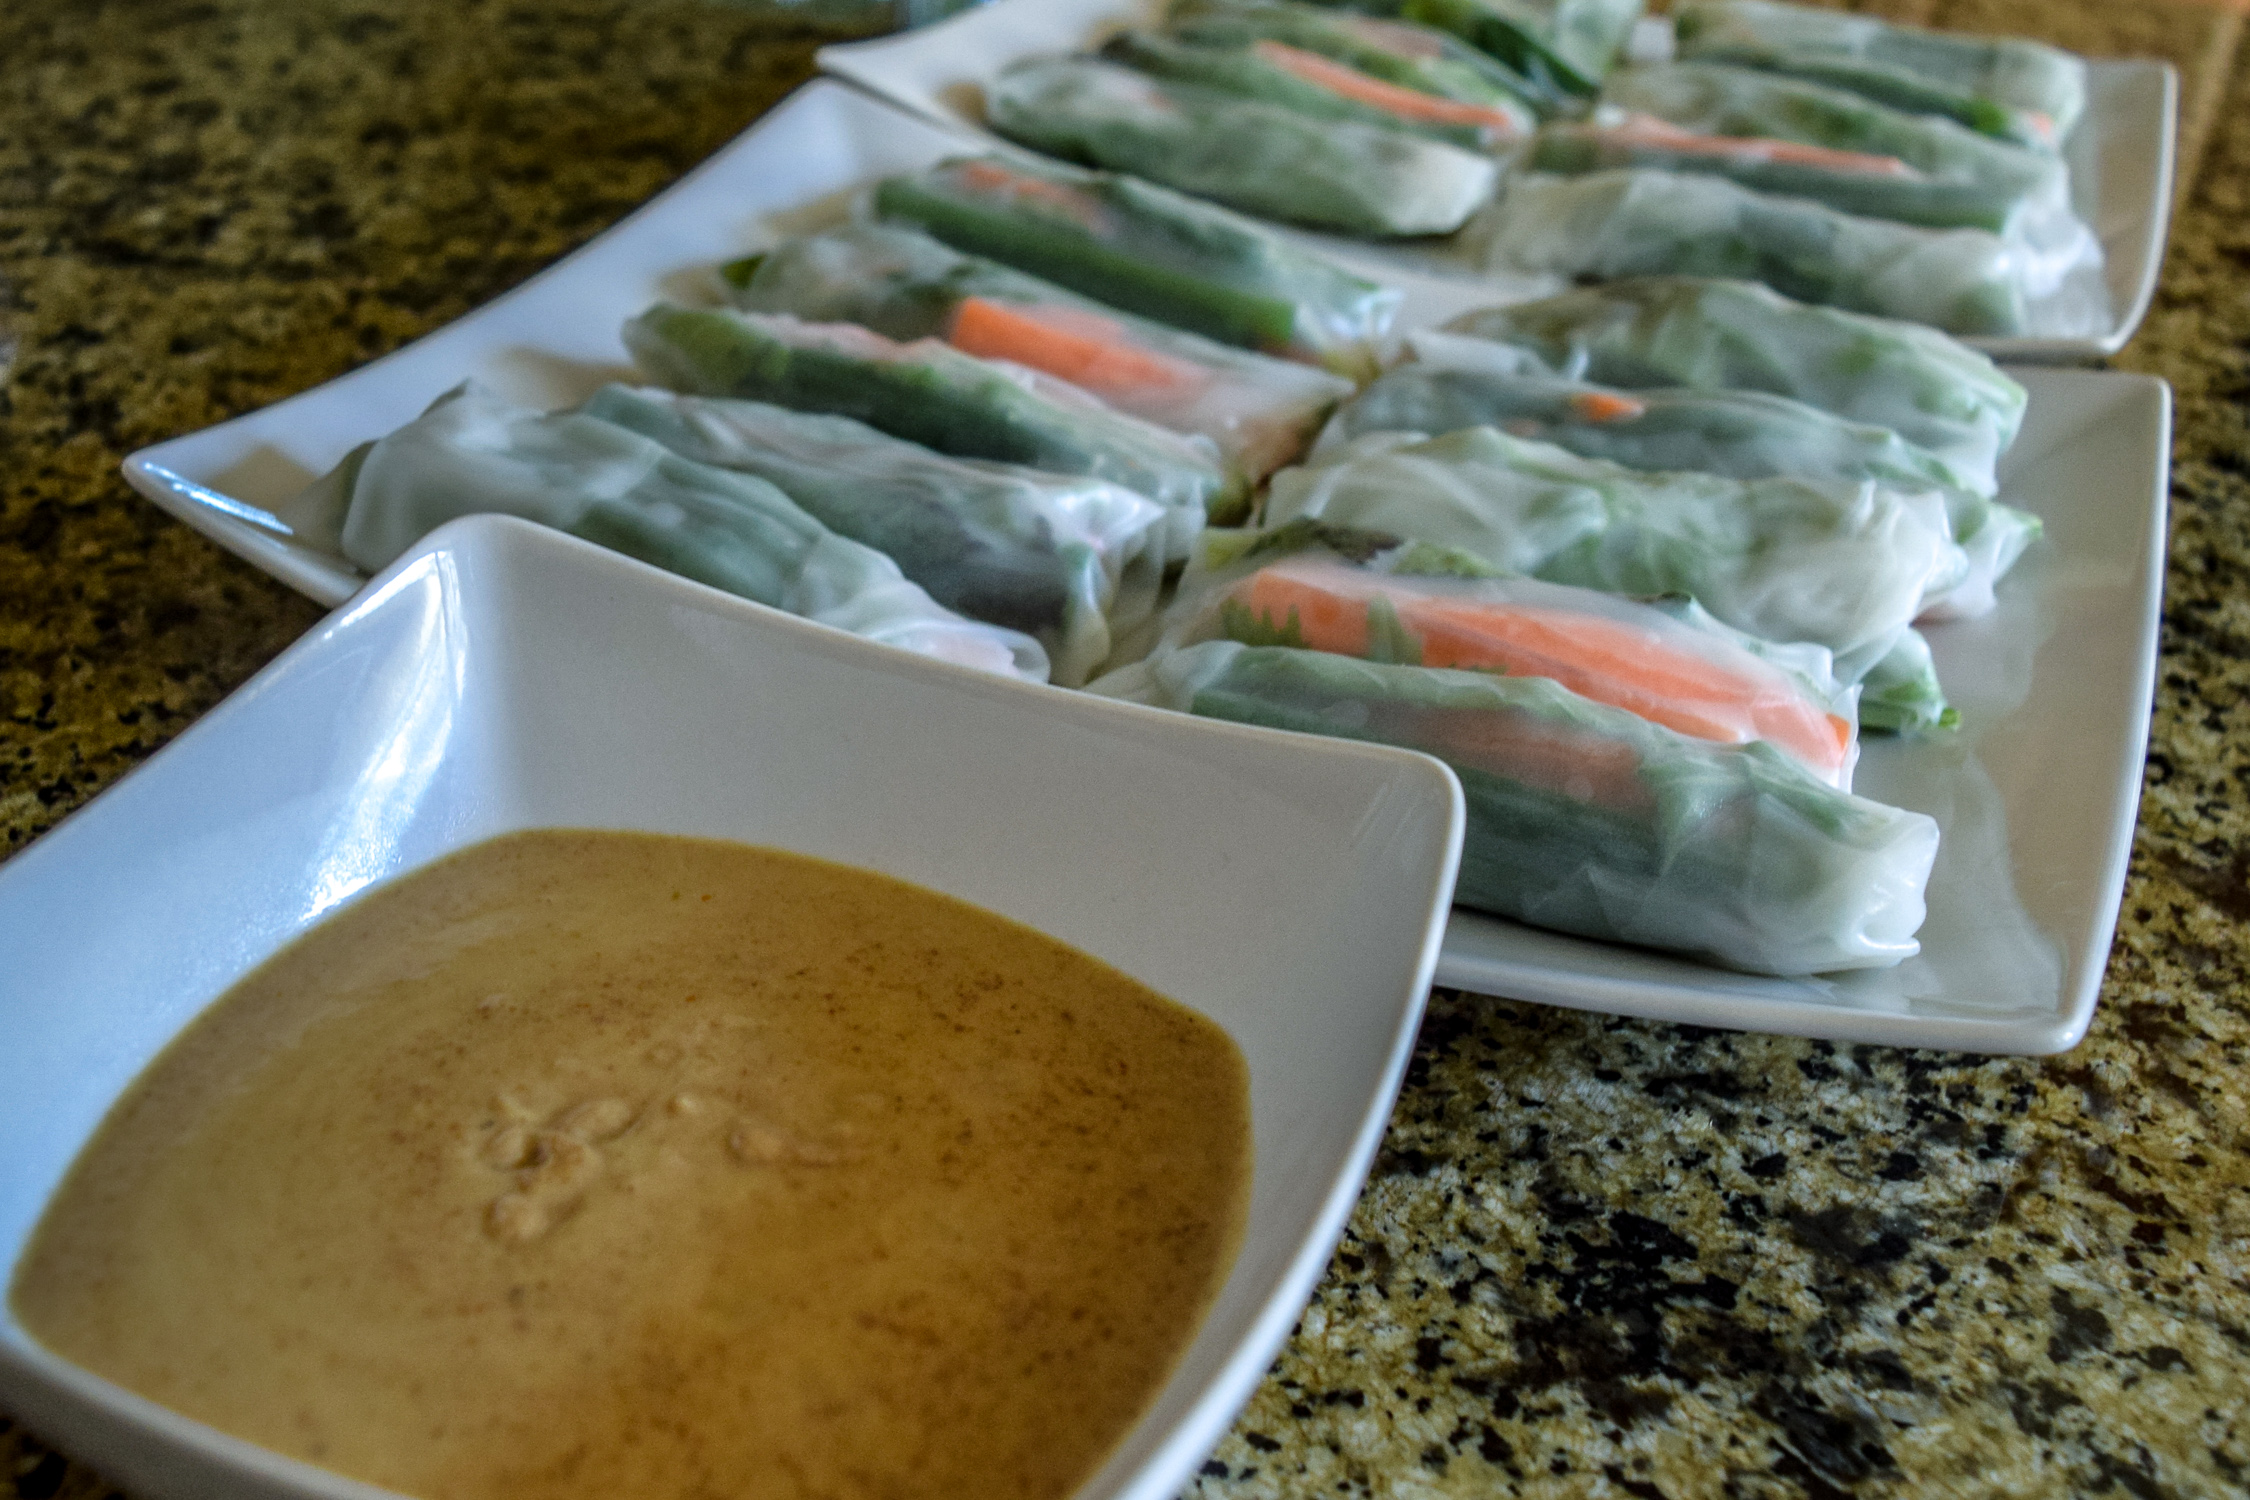 Finished veggie spring rolls and peanut sauce from angle